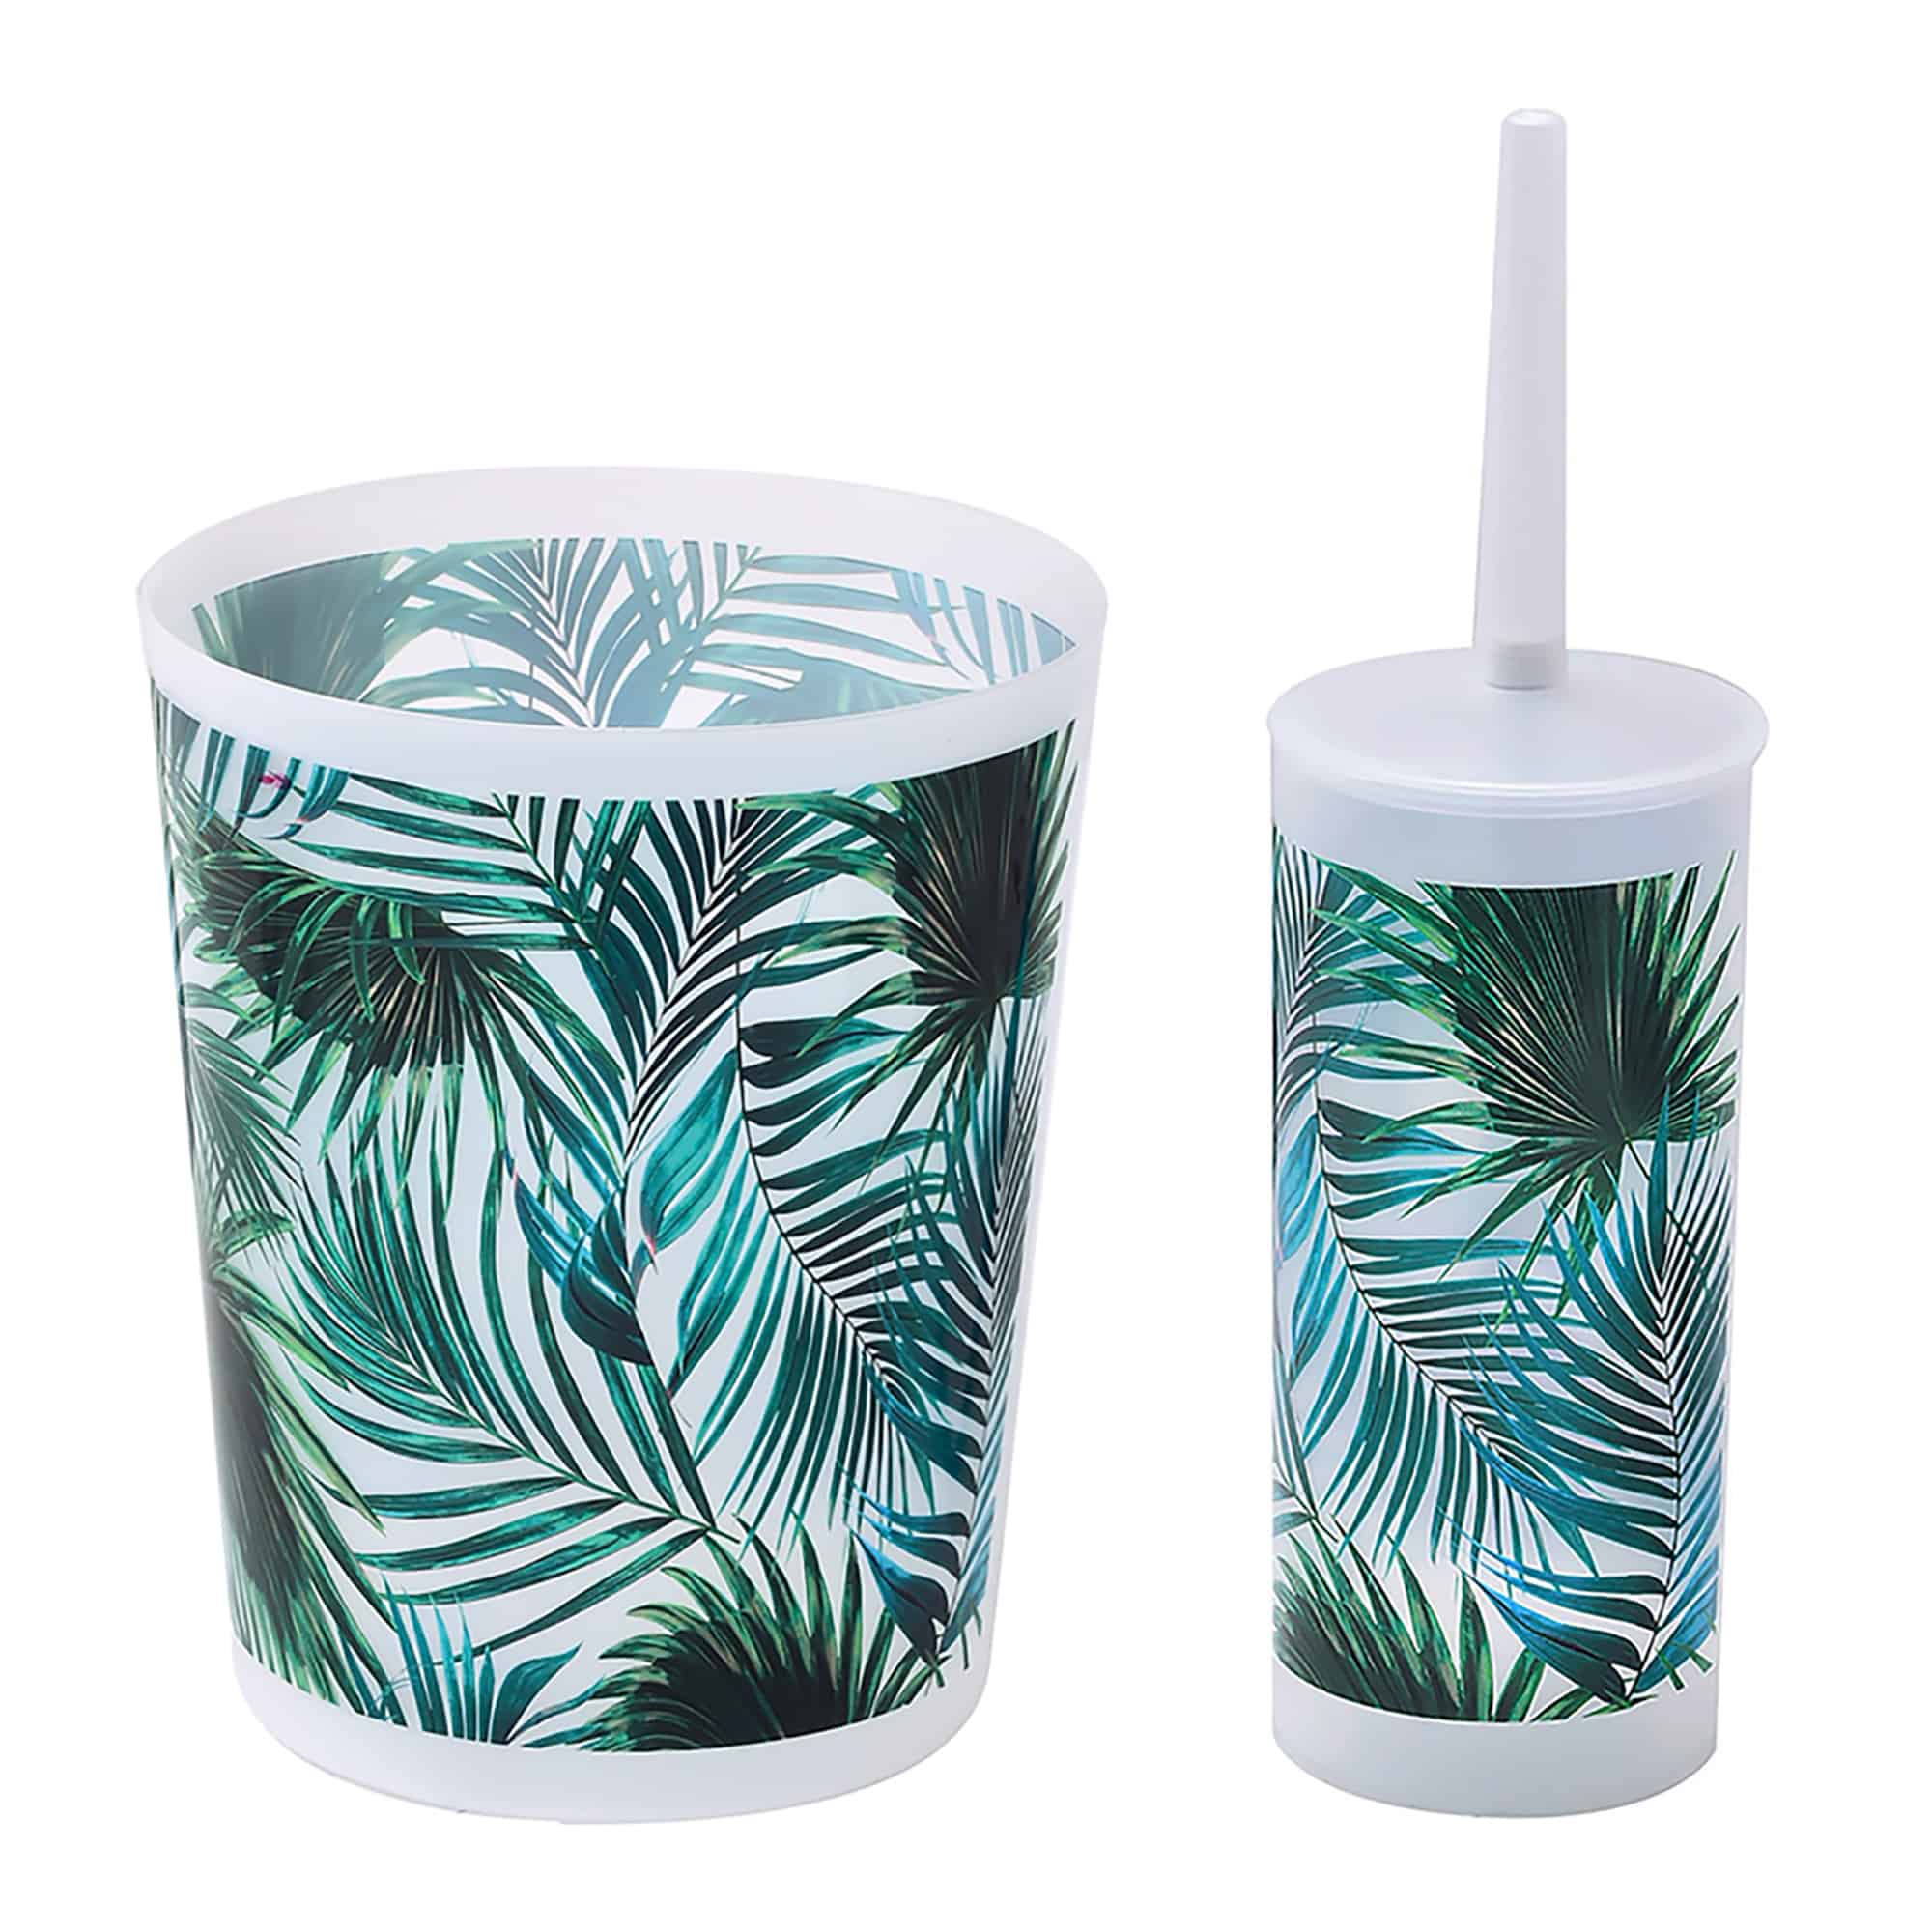 decorative plastic trash can and toilet brush with palm leaf design